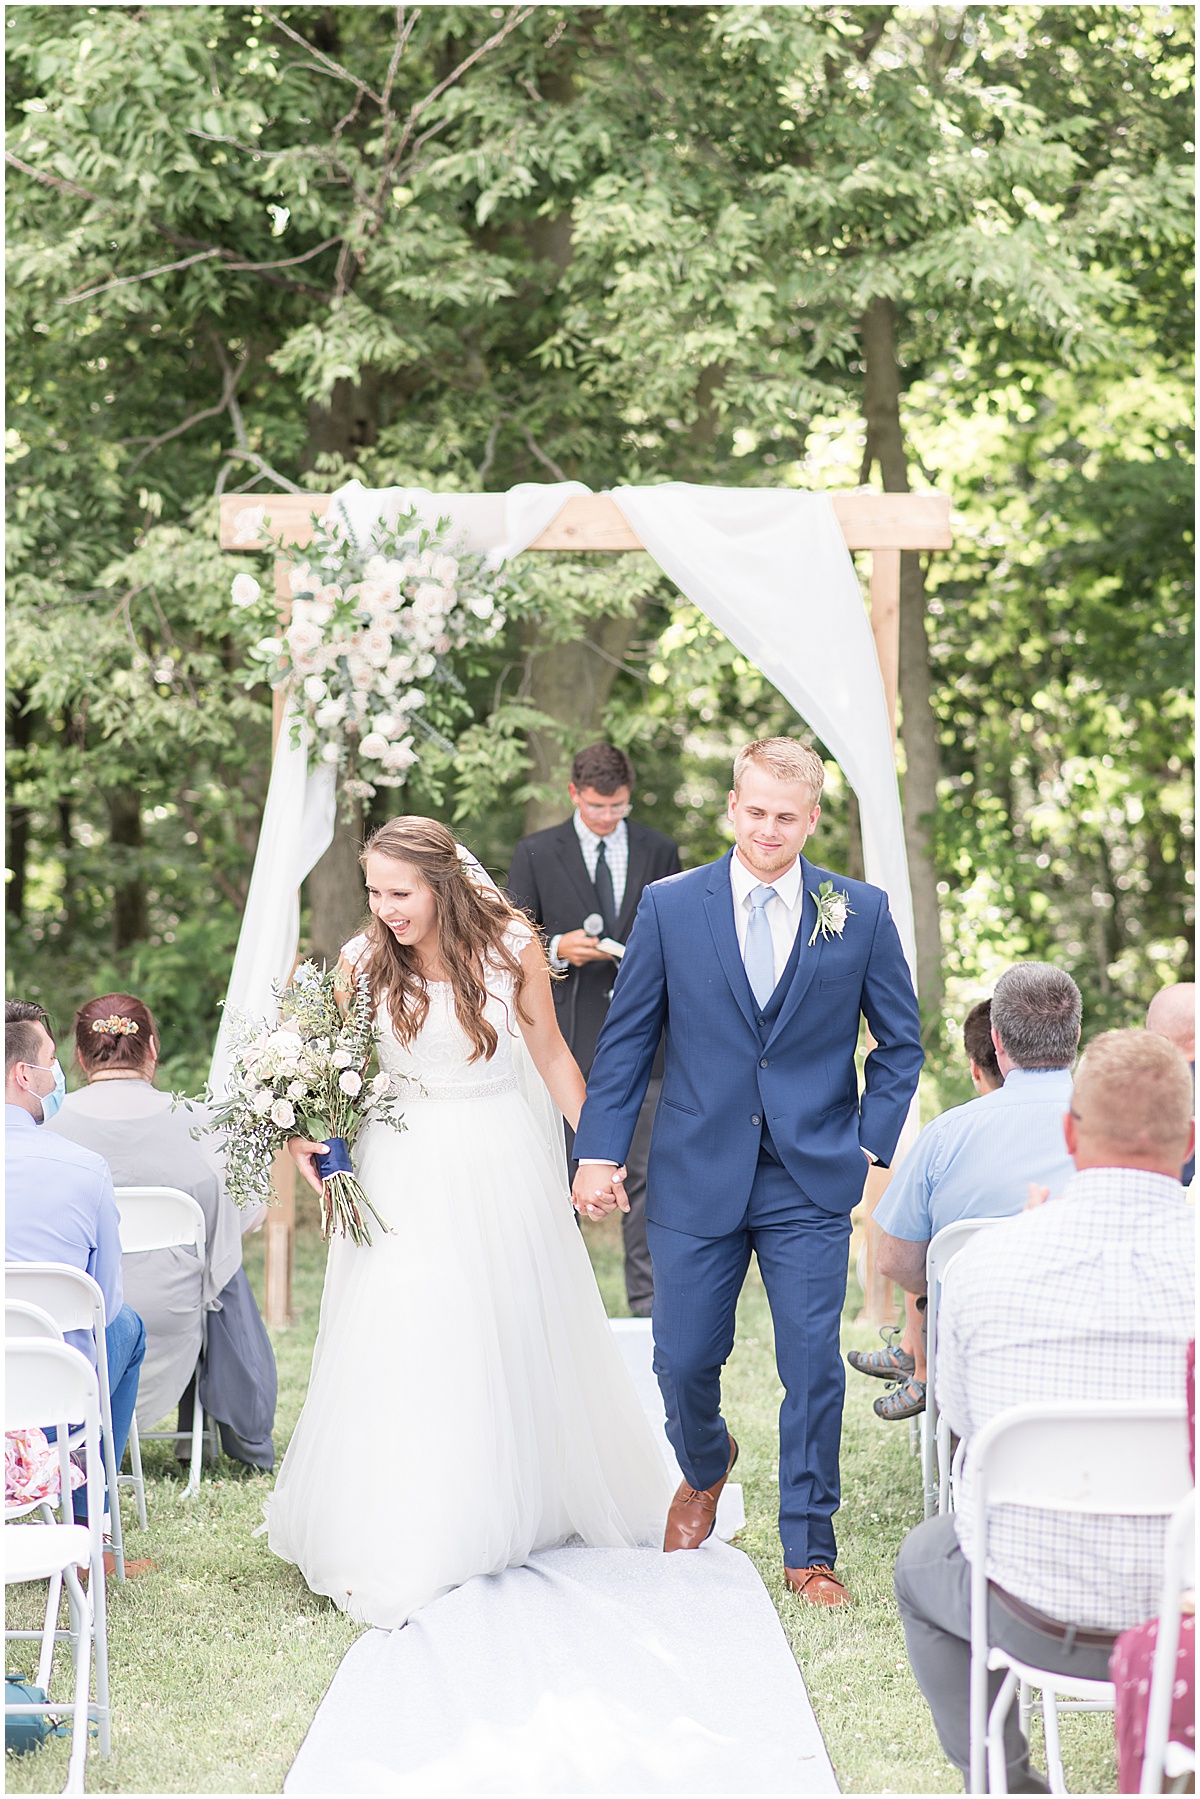 Wedding Ceremony at The Blessing Barn in Lafayette, Indiana